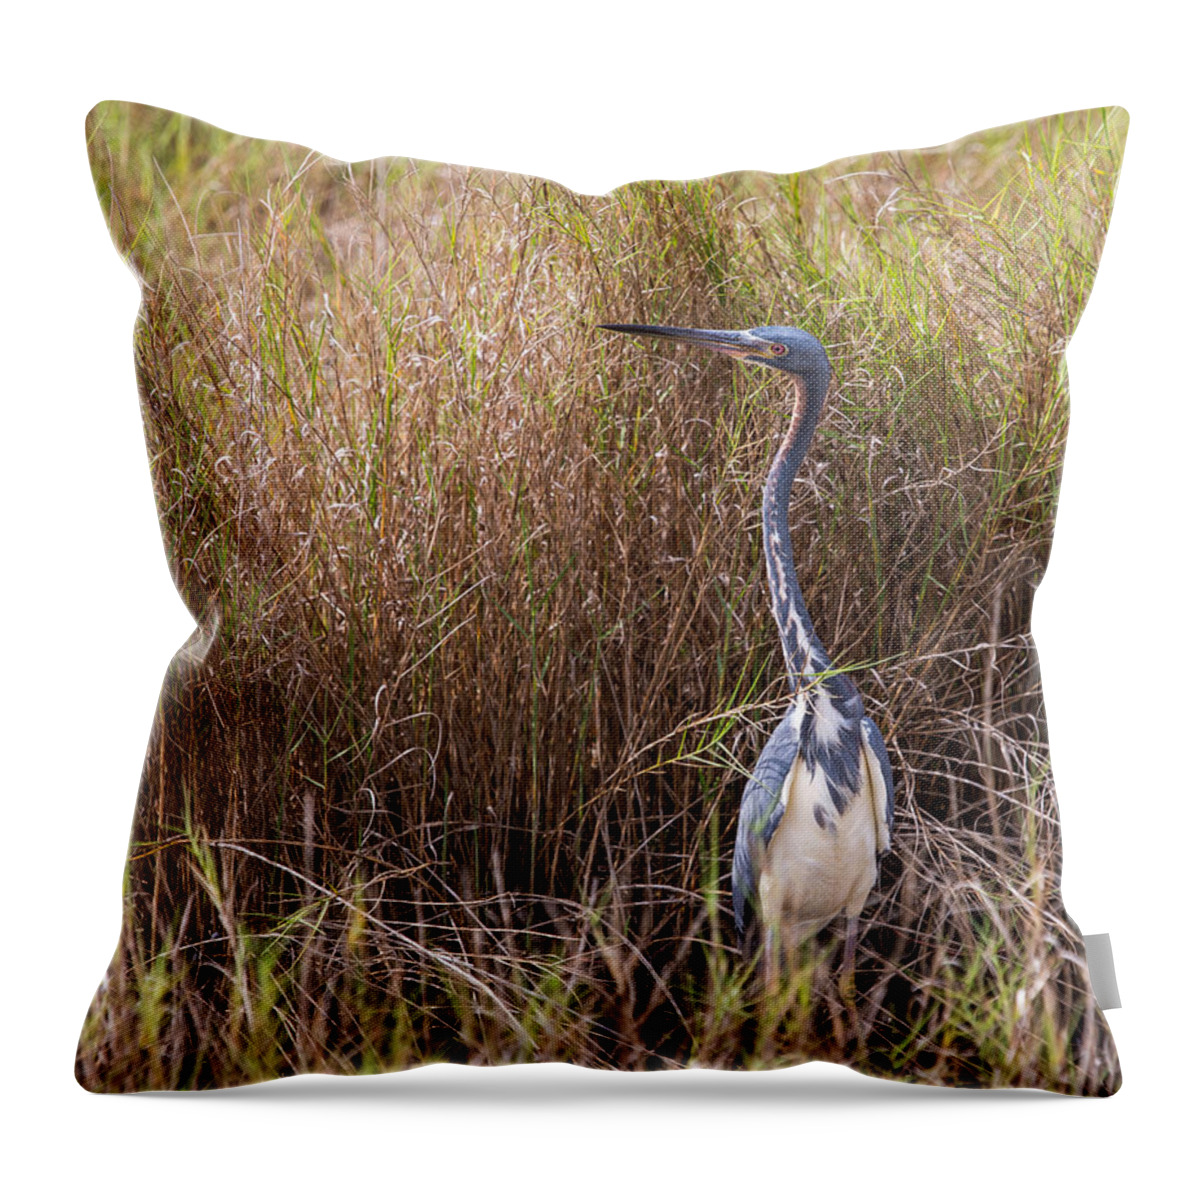 Tricolored Heron Throw Pillow featuring the photograph Tricolored Heron Peeping Over the Rushes by John M Bailey